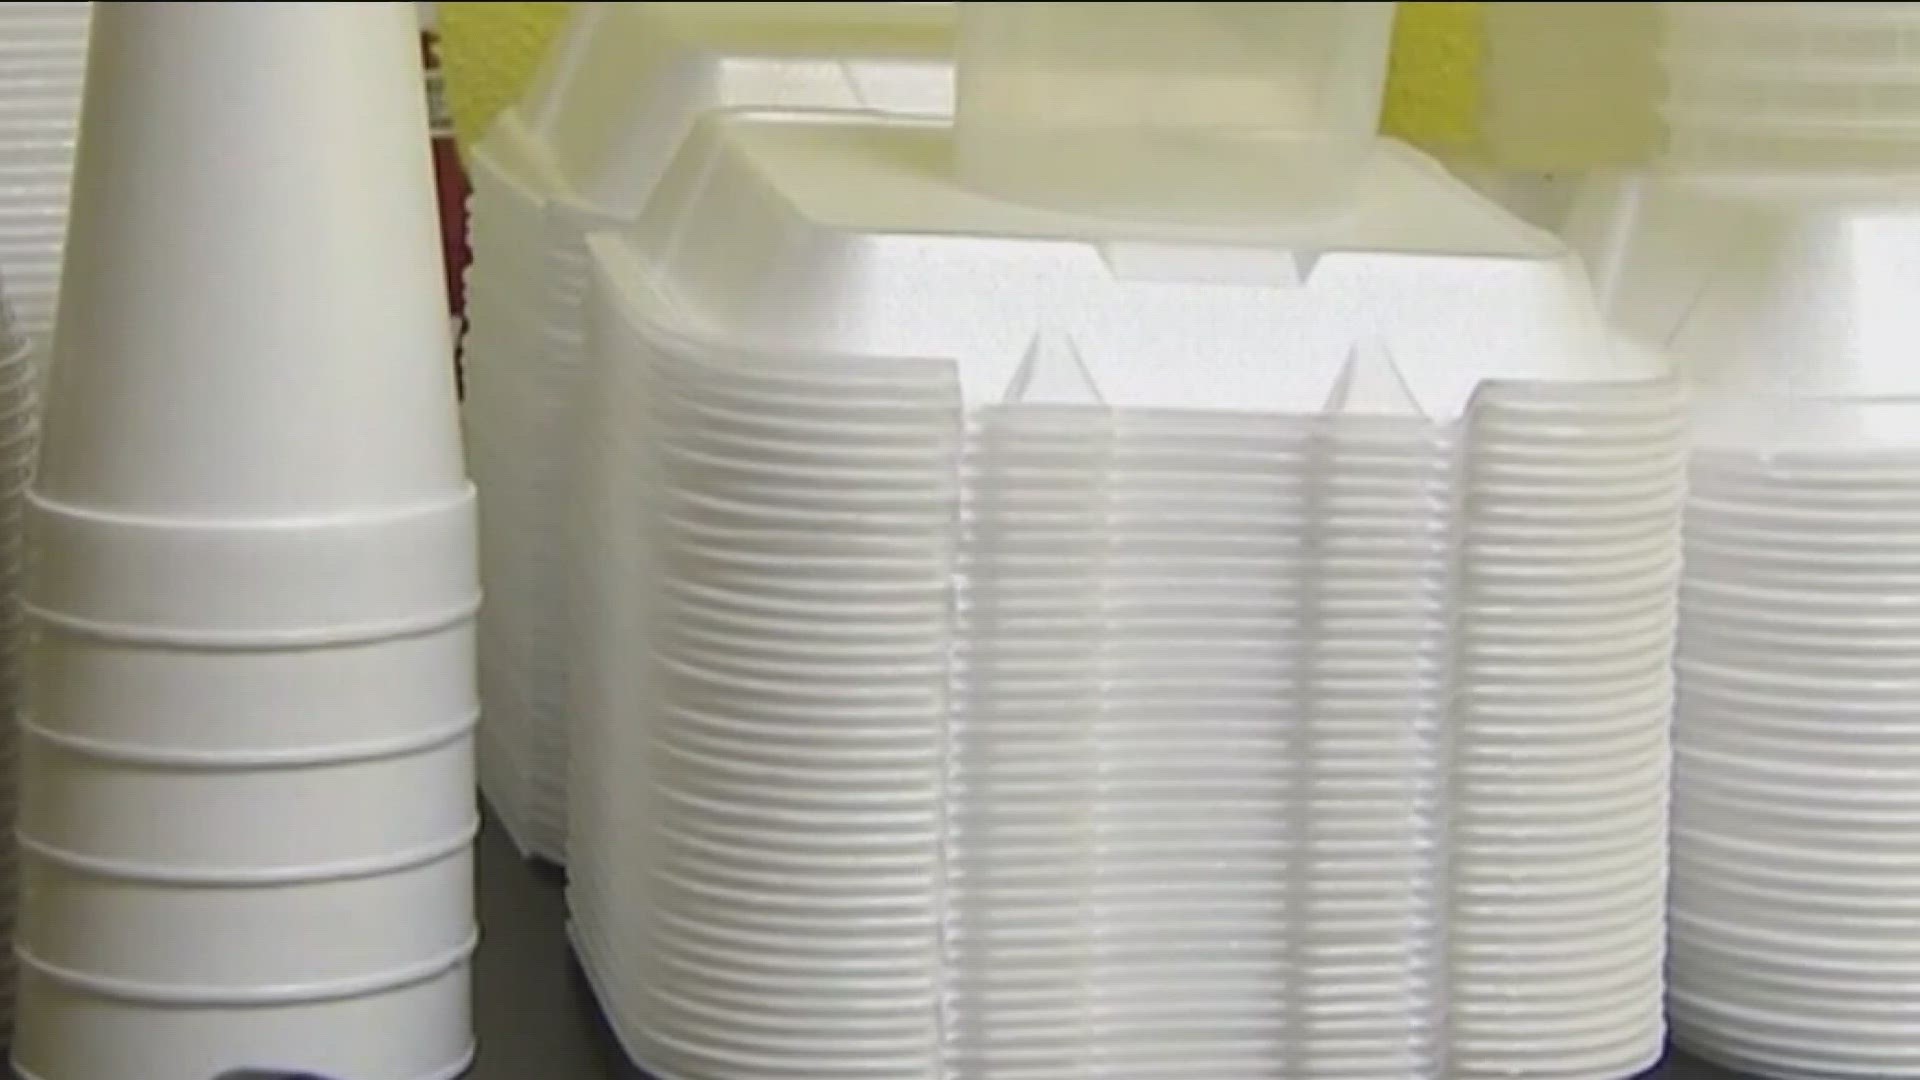 Styrofoam officially banned in San Diego